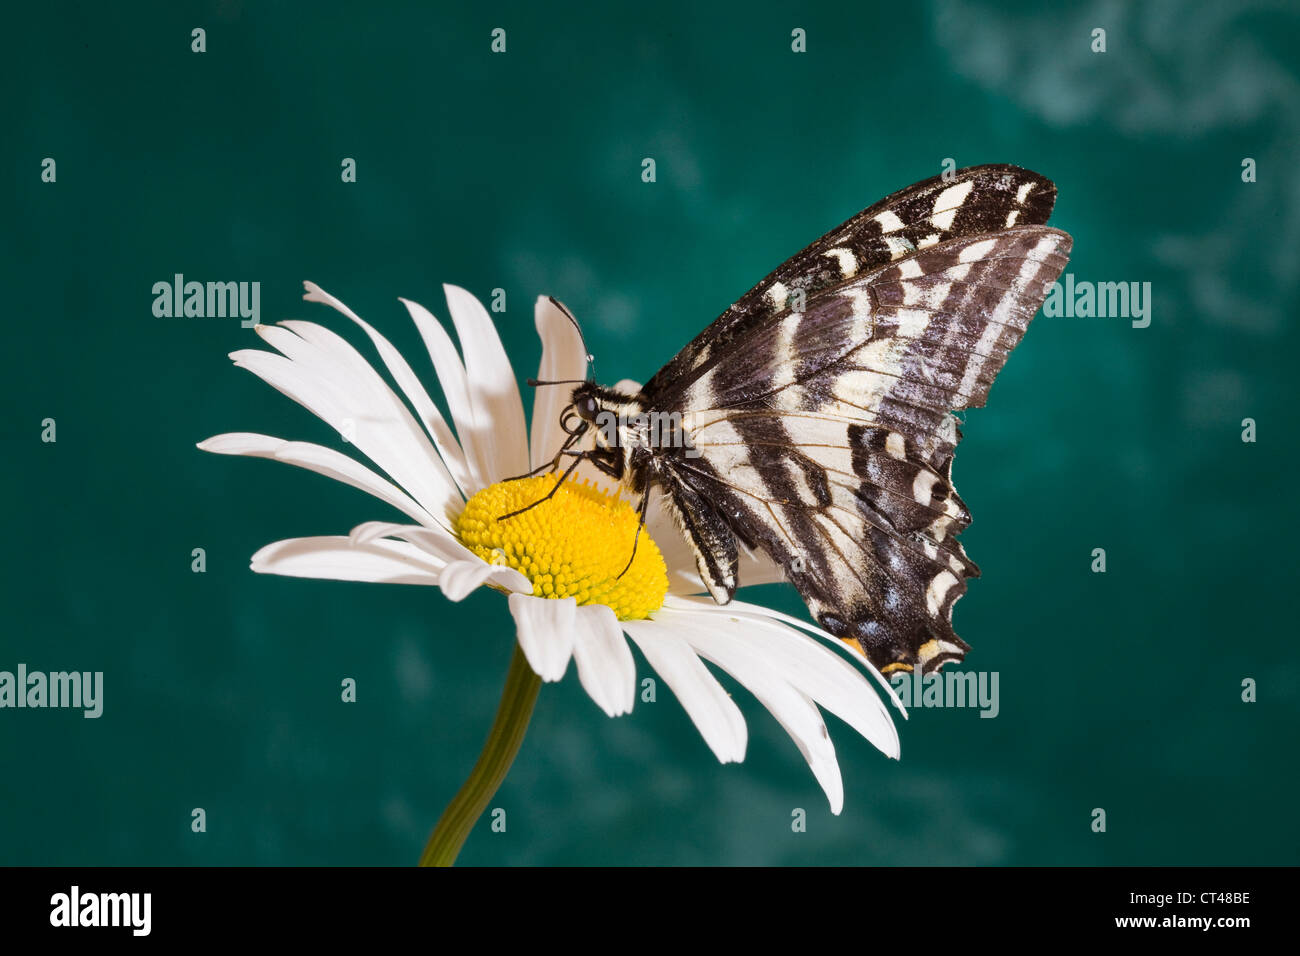 A black swallowtail butterfly about to land on a white daisy Stock Photo